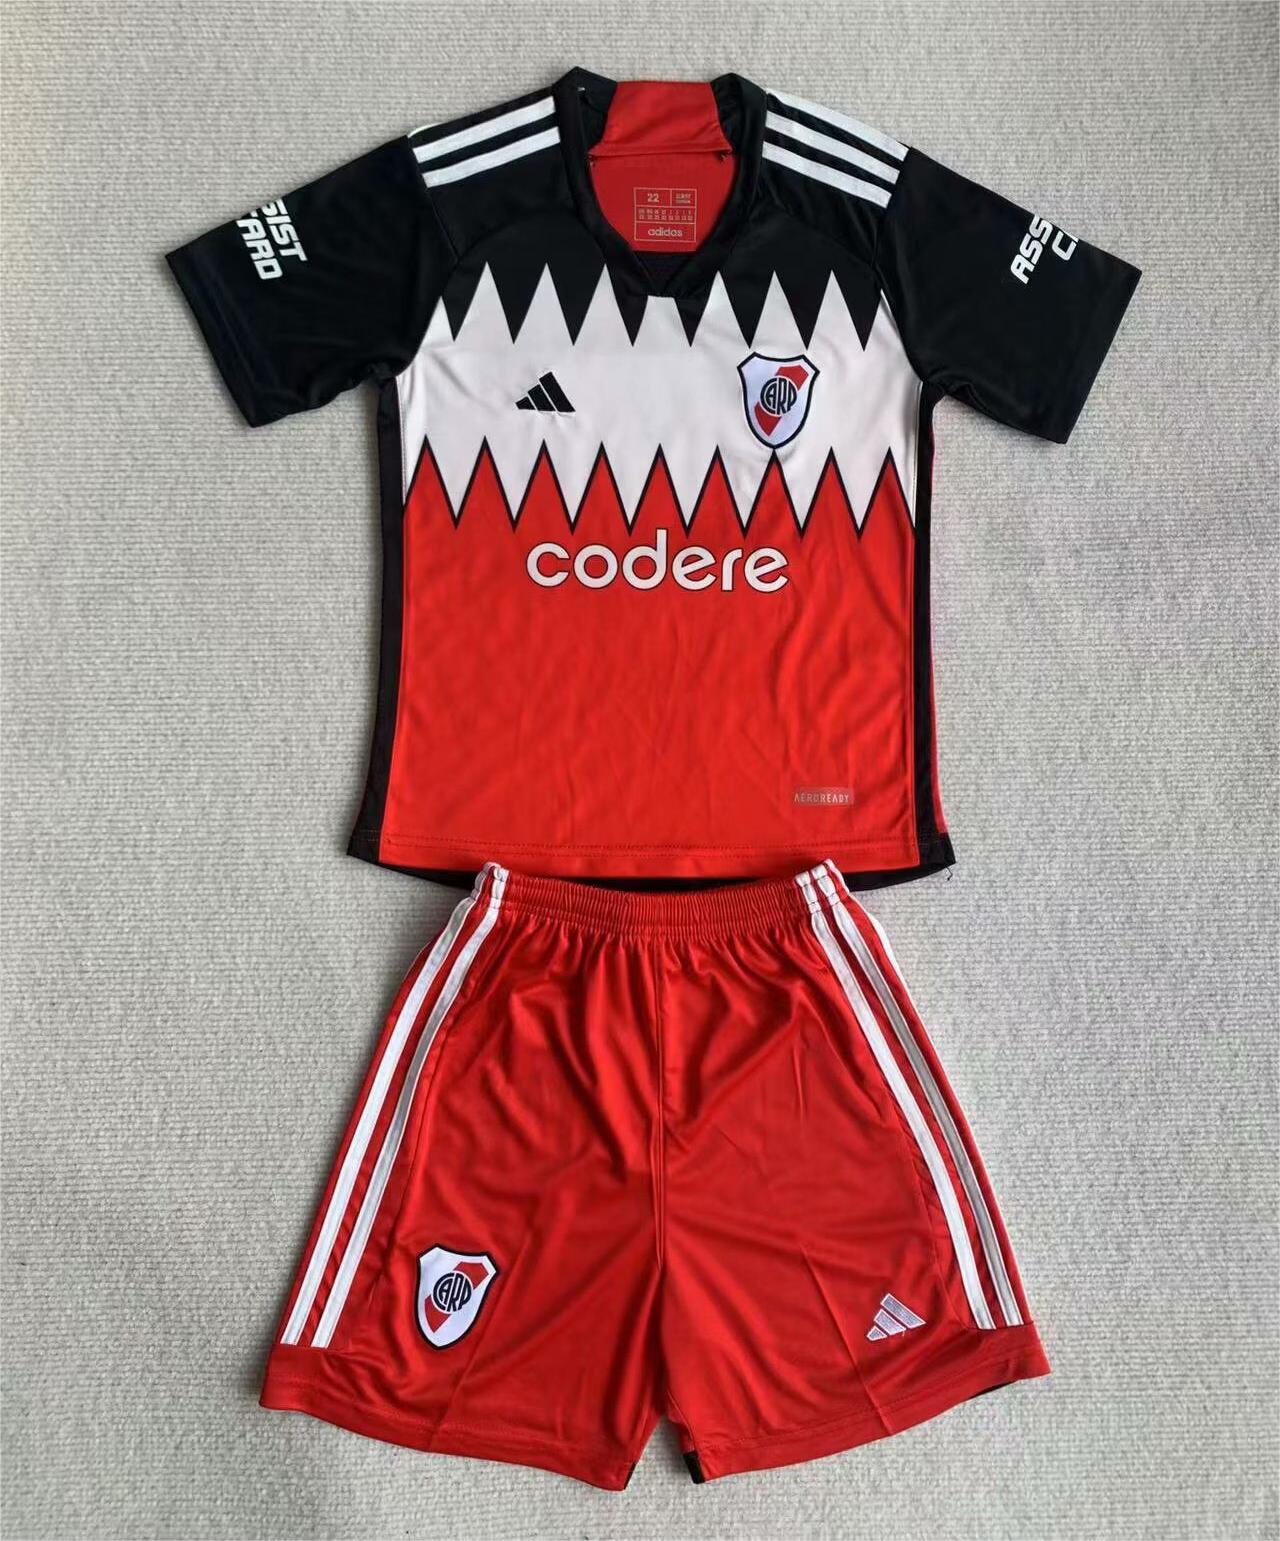 Kids-River Plate 23/24 Away Black/White/Red Soccer Jersey